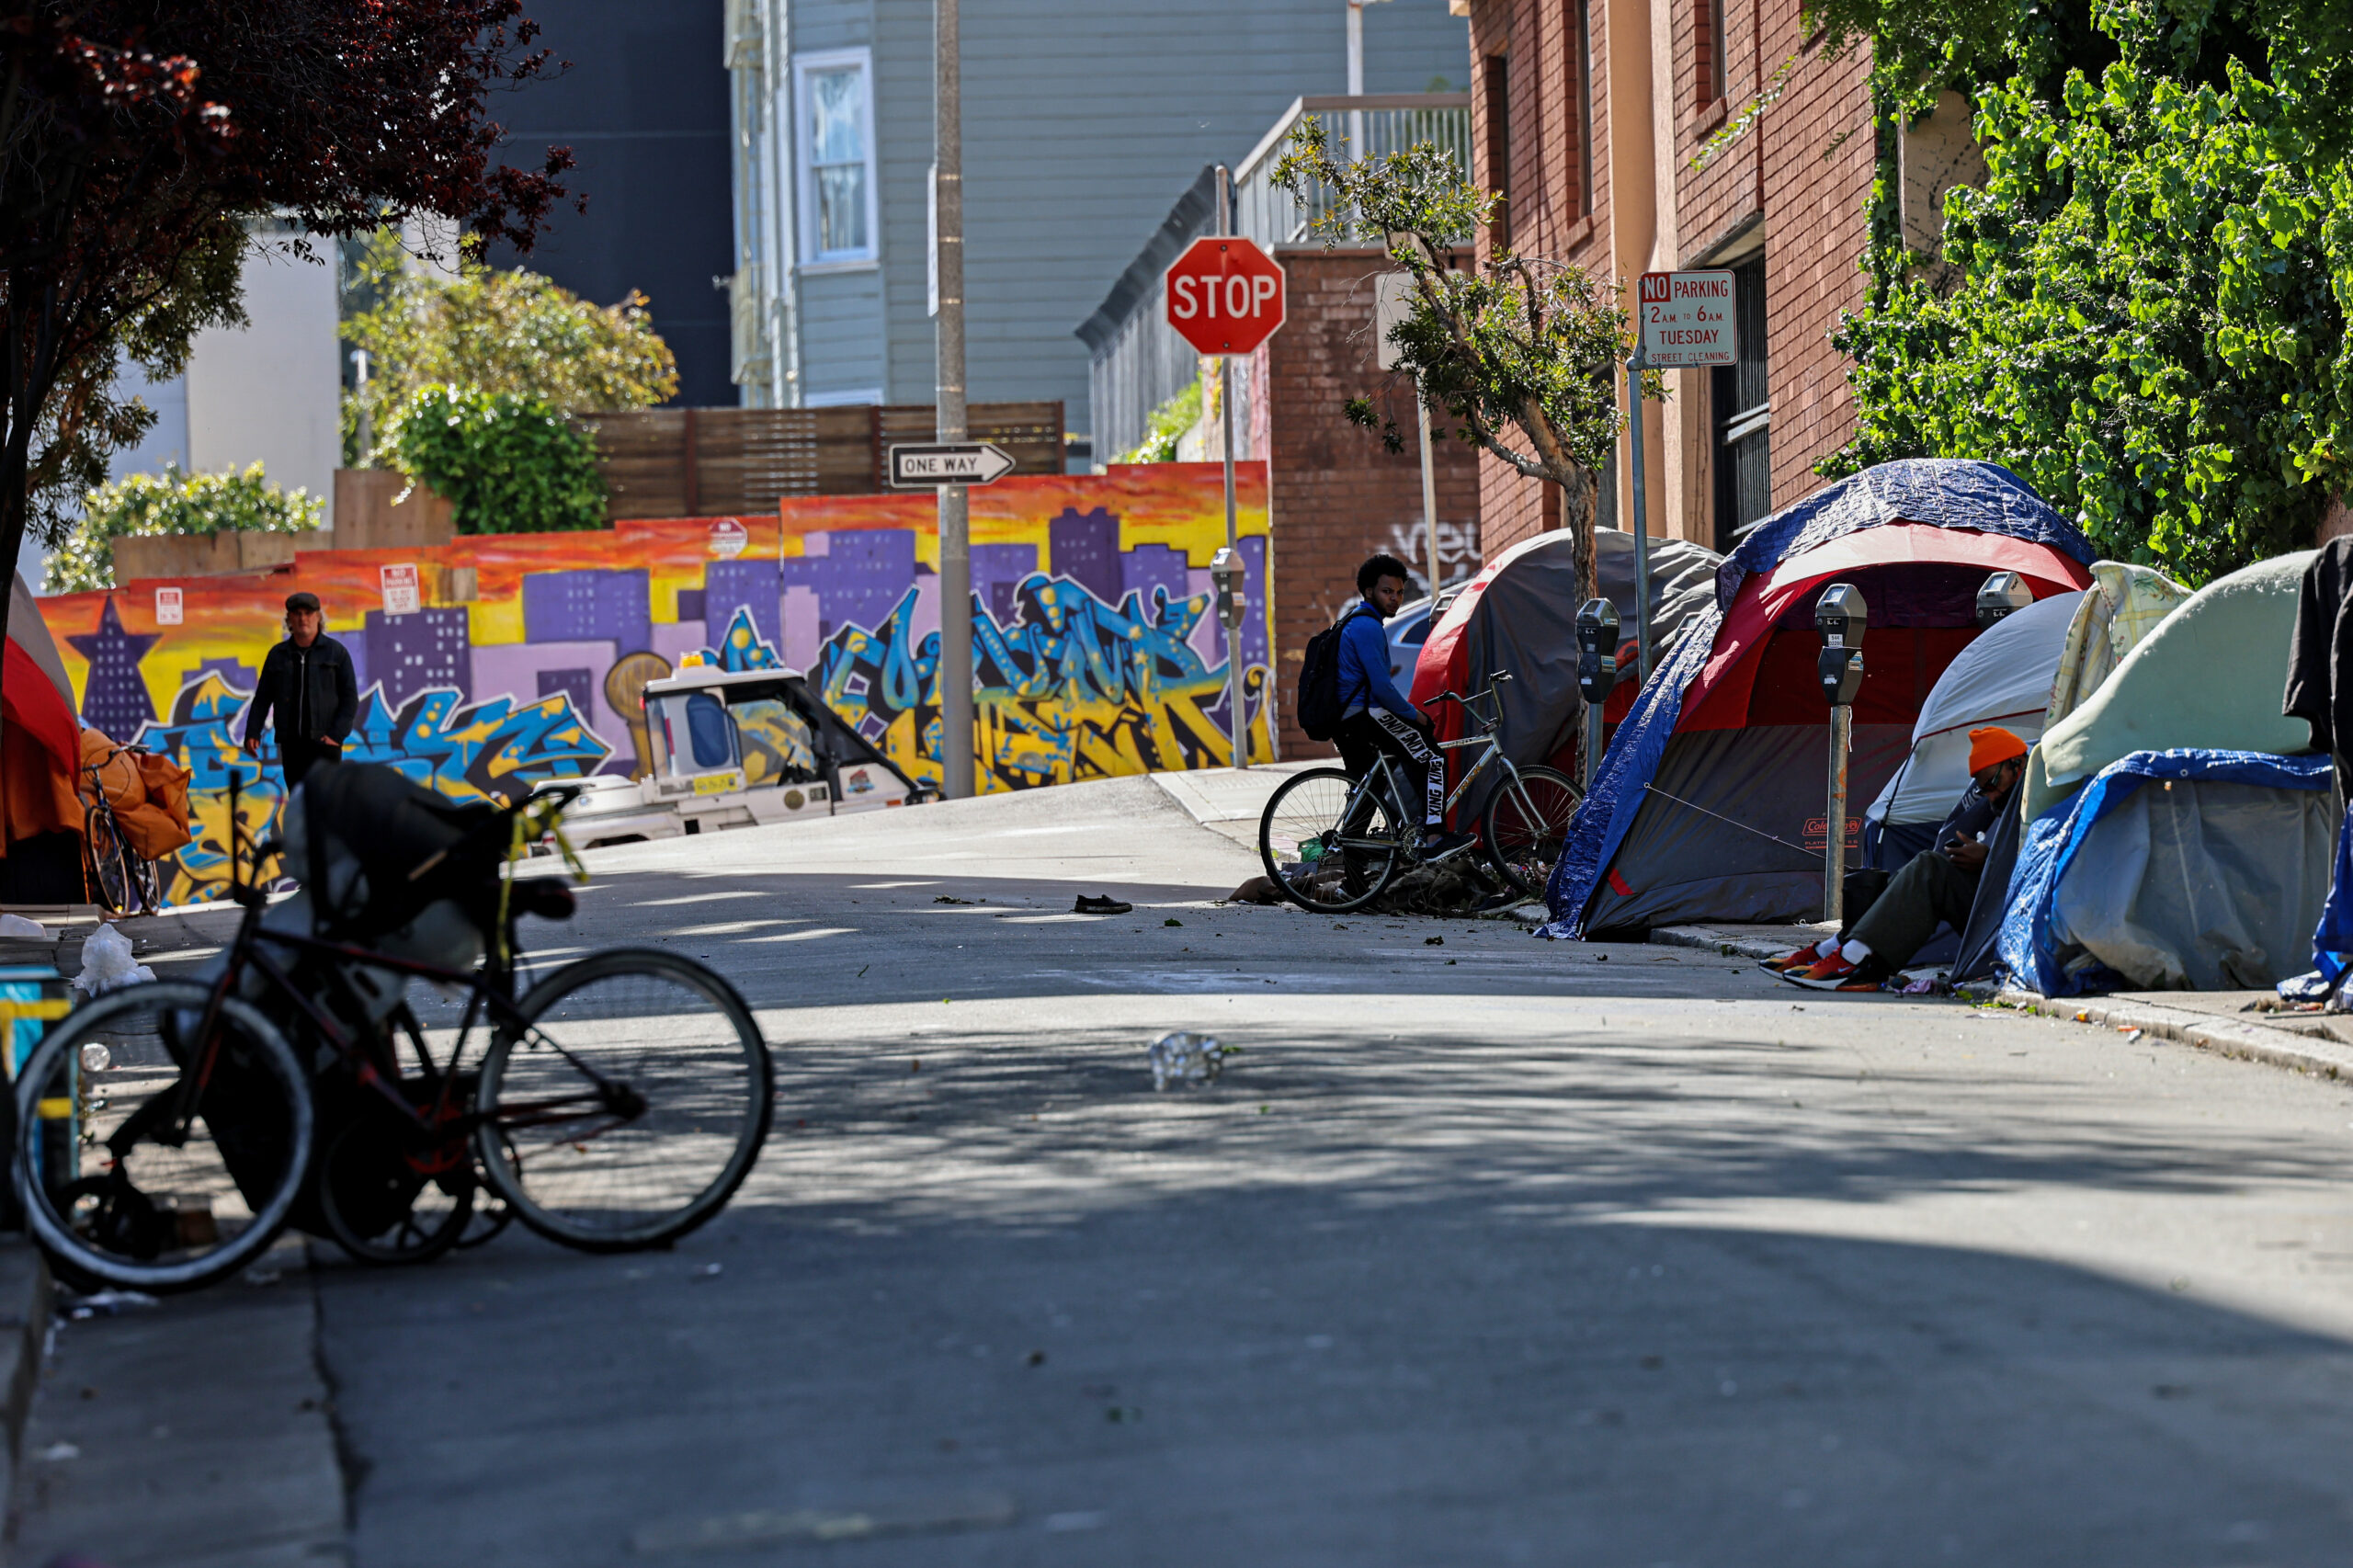 San Francisco ‘Resolved’ an Encampment. Hours Later, It Was Back